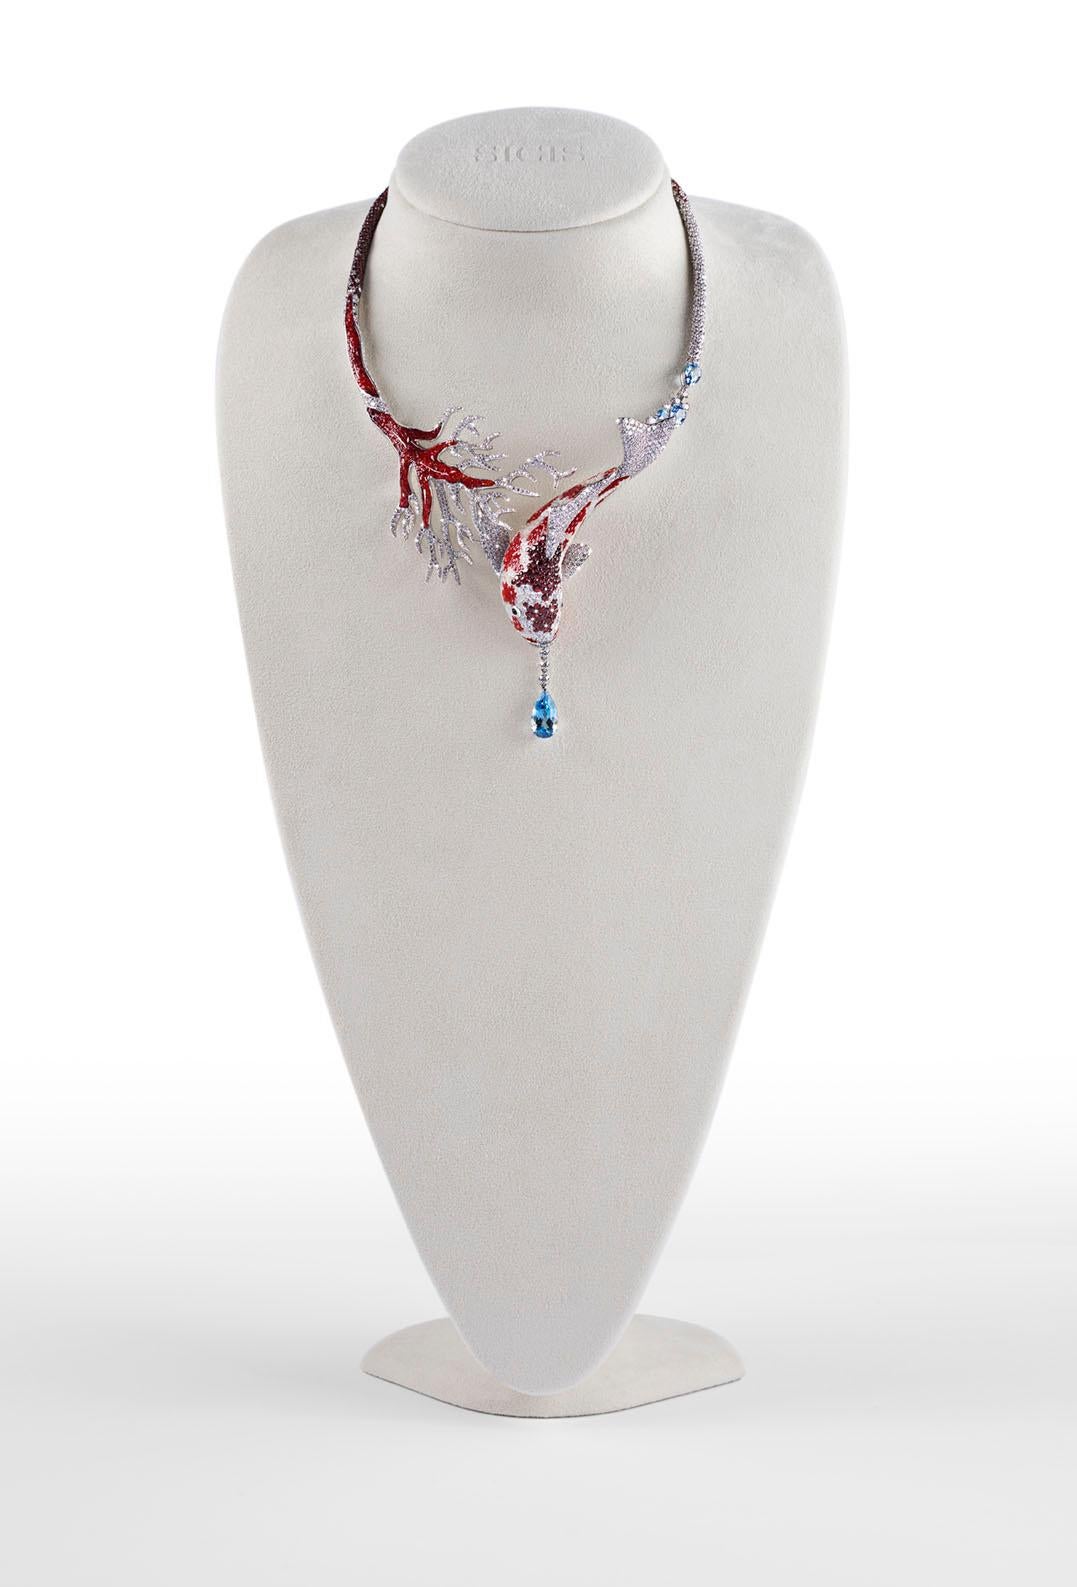 Necklace Gold White Diamonds Sapphires Aquamarine Mother of Pearl NanoMosaic In New Condition For Sale In London, GB